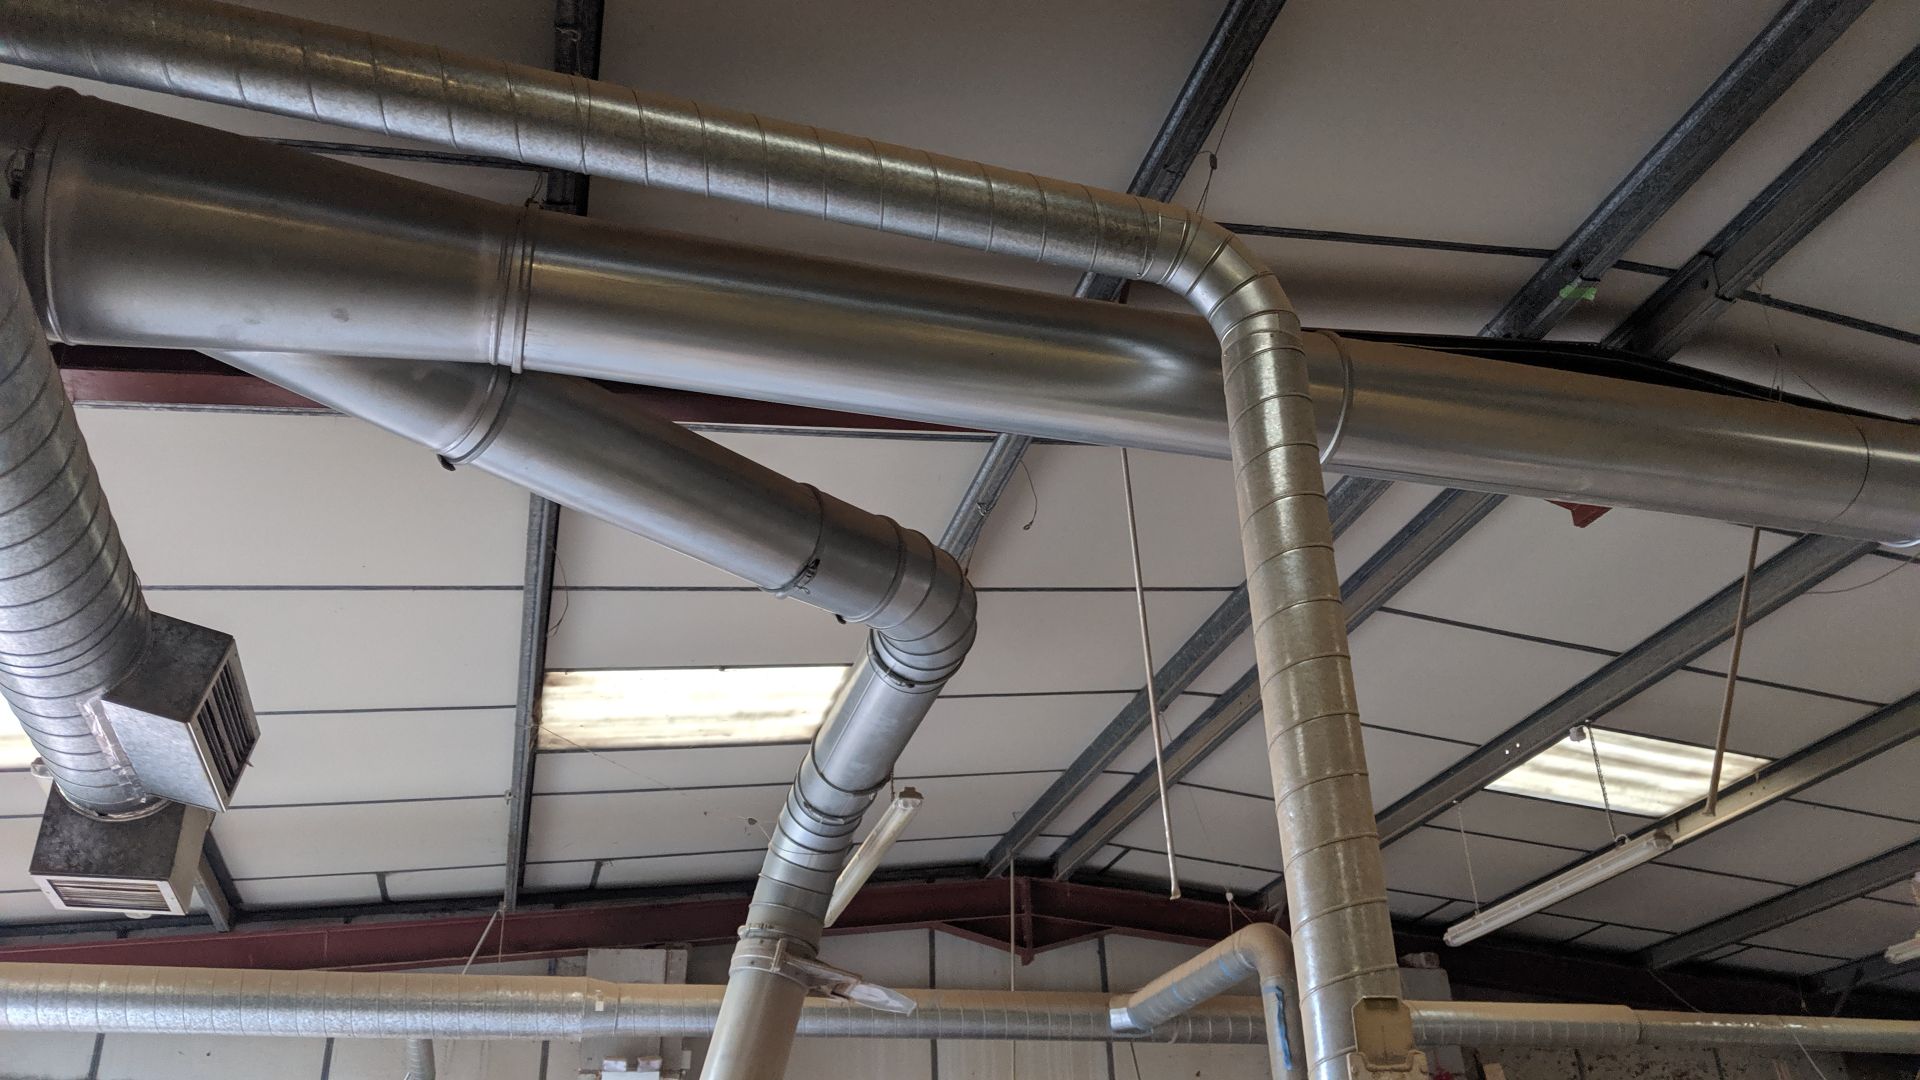 2 off large external dust extractors including ducting attached to each unit, running throughout the - Image 39 of 44